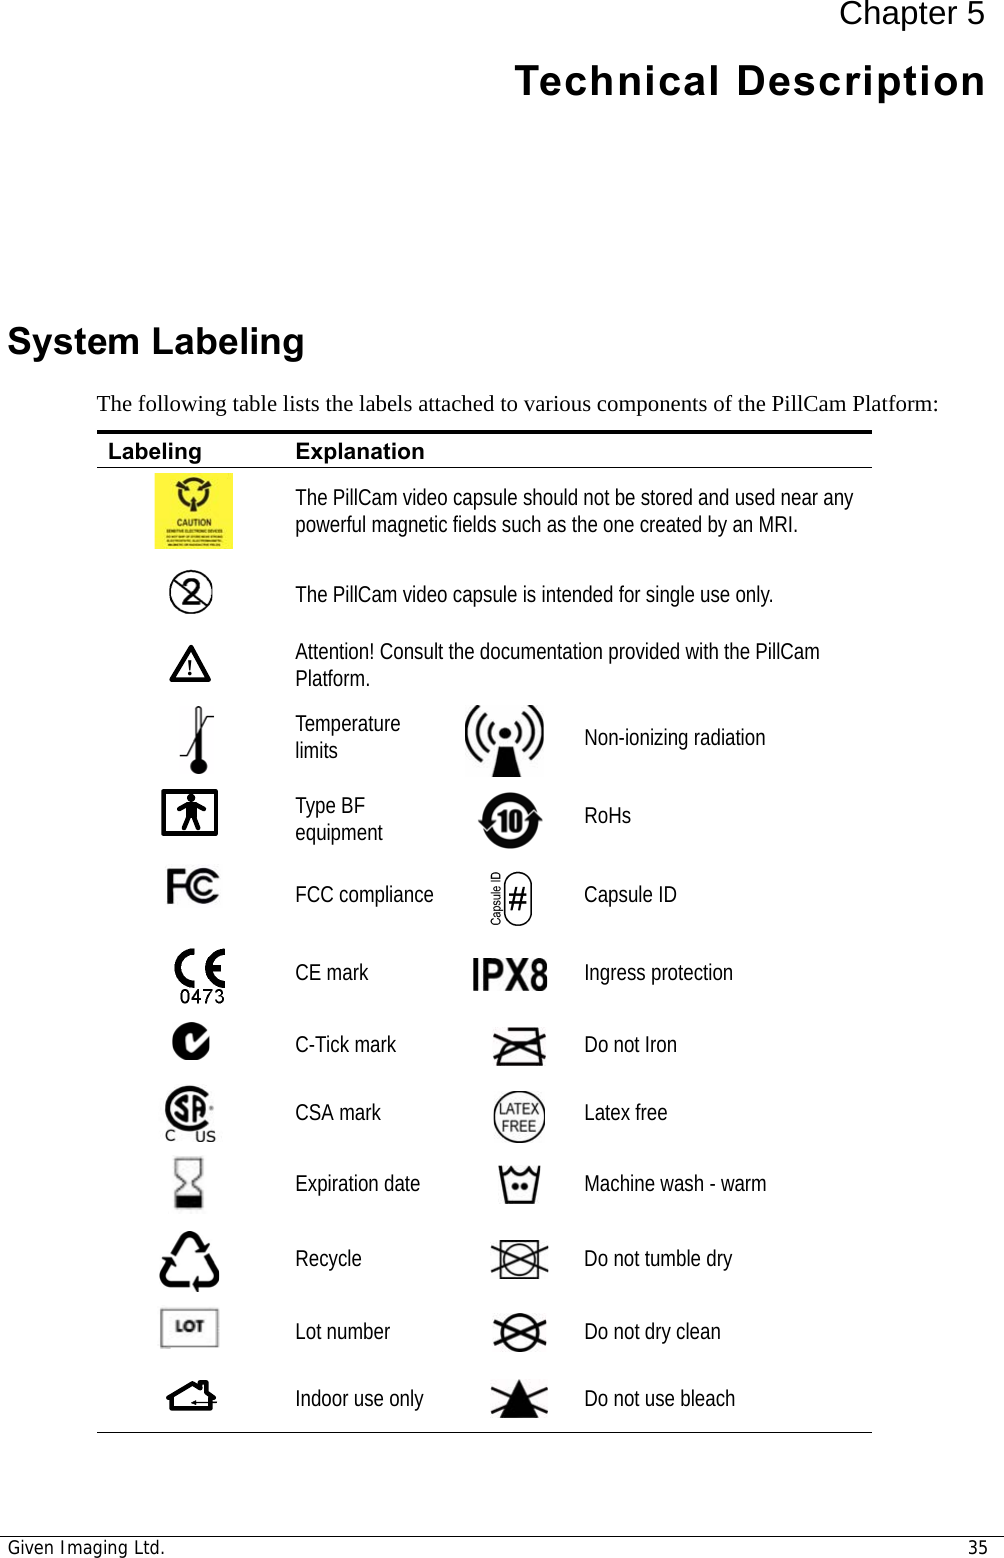 Given Imaging Ltd. 35Chapter 5Technical DescriptionSystem LabelingThe following table lists the labels attached to various components of the PillCam Platform:Labeling ExplanationThe PillCam video capsule should not be stored and used near any powerful magnetic fields such as the one created by an MRI.The PillCam video capsule is intended for single use only. Attention! Consult the documentation provided with the PillCam Platform.Temperature limits Non-ionizing radiationType BF equipment RoHsFCC compliance Capsule IDCE mark Ingress protectionC-Tick mark Do not IronCSA mark Latex freeExpiration date Machine wash - warmRecycle Do not tumble dryLot number Do not dry cleanIndoor use only Do not use bleach! 